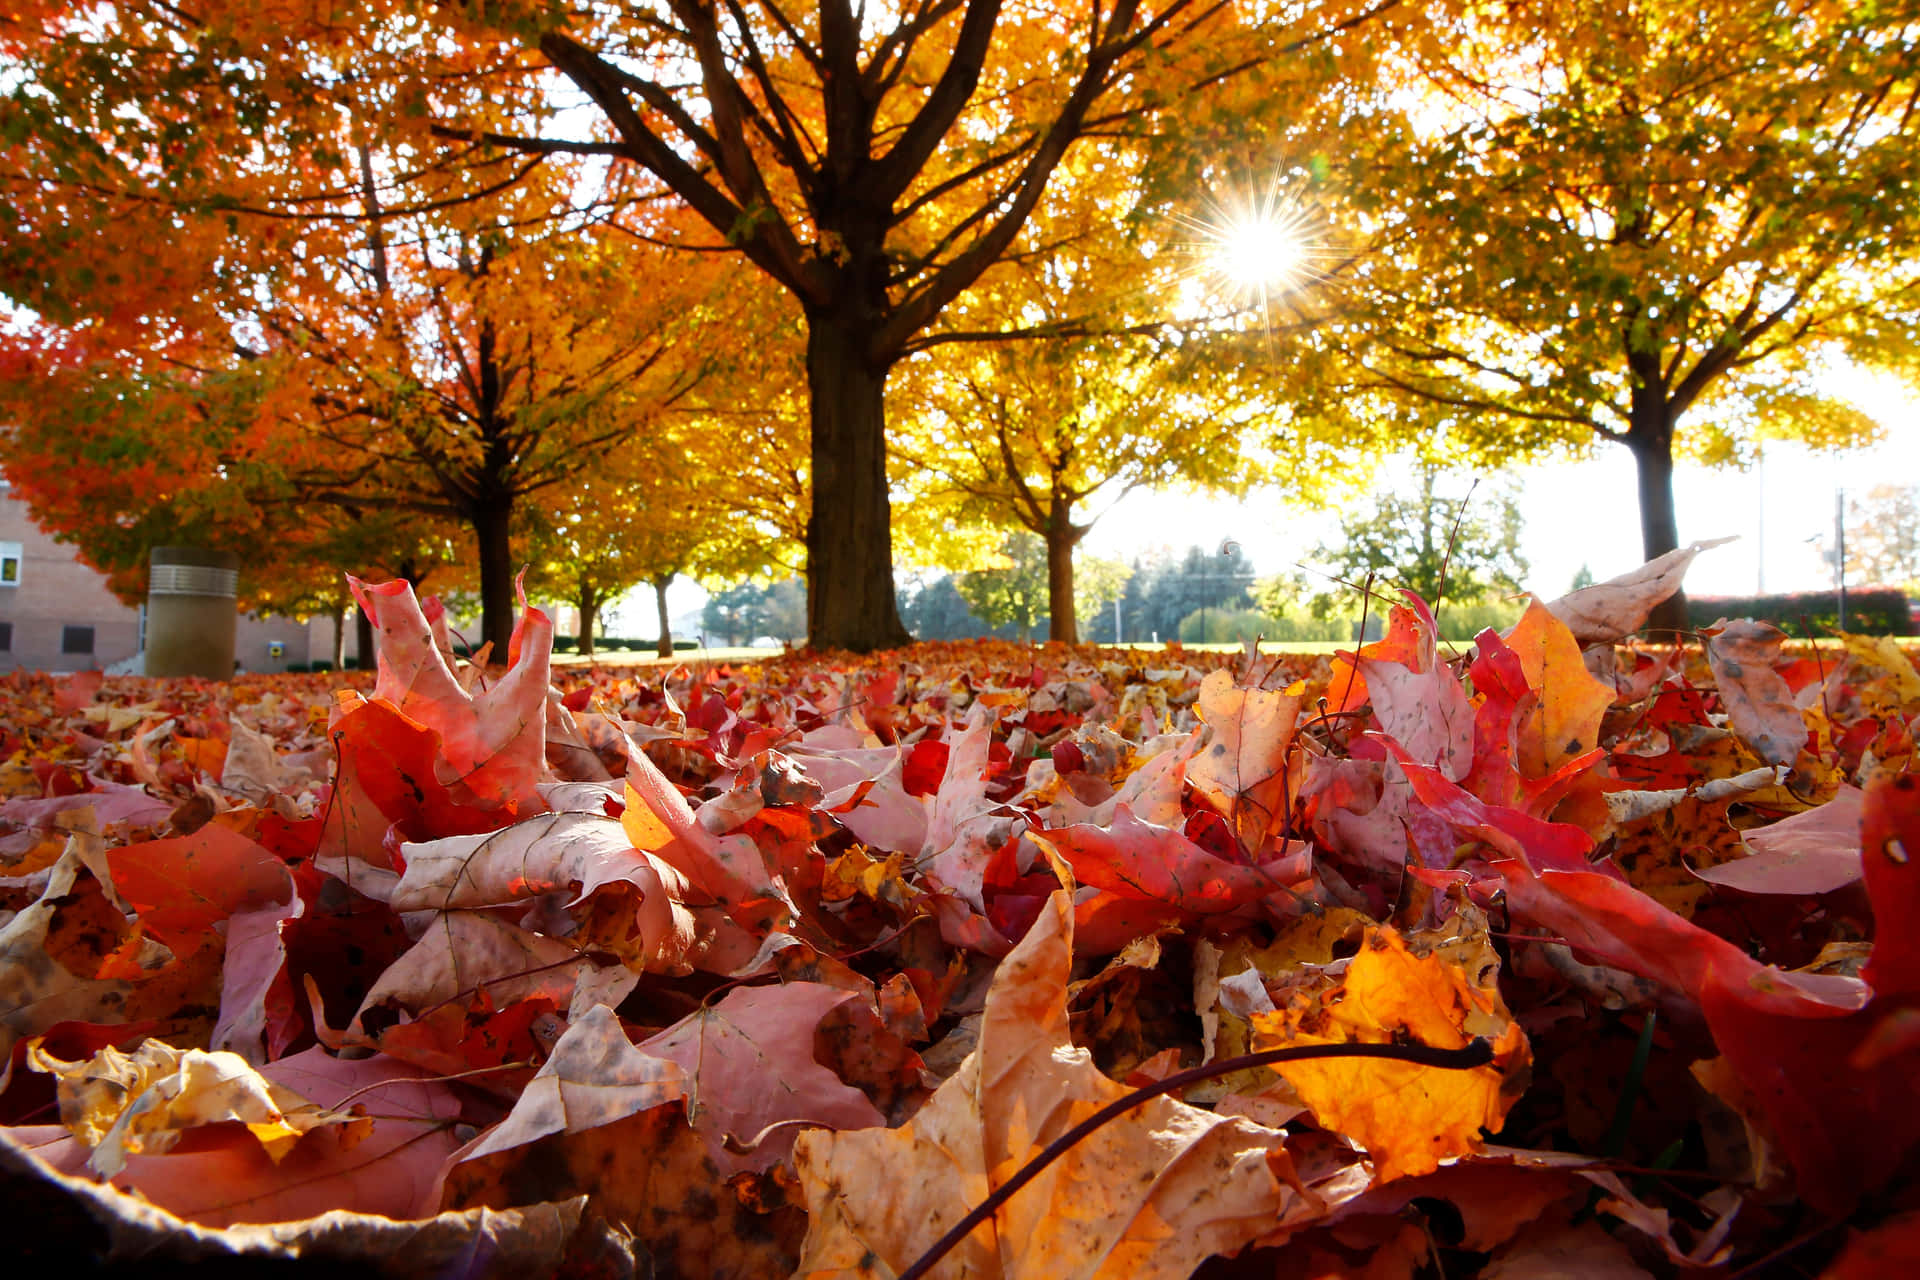 Enjoy the beauty of autumn with nature’s vibrant foliage